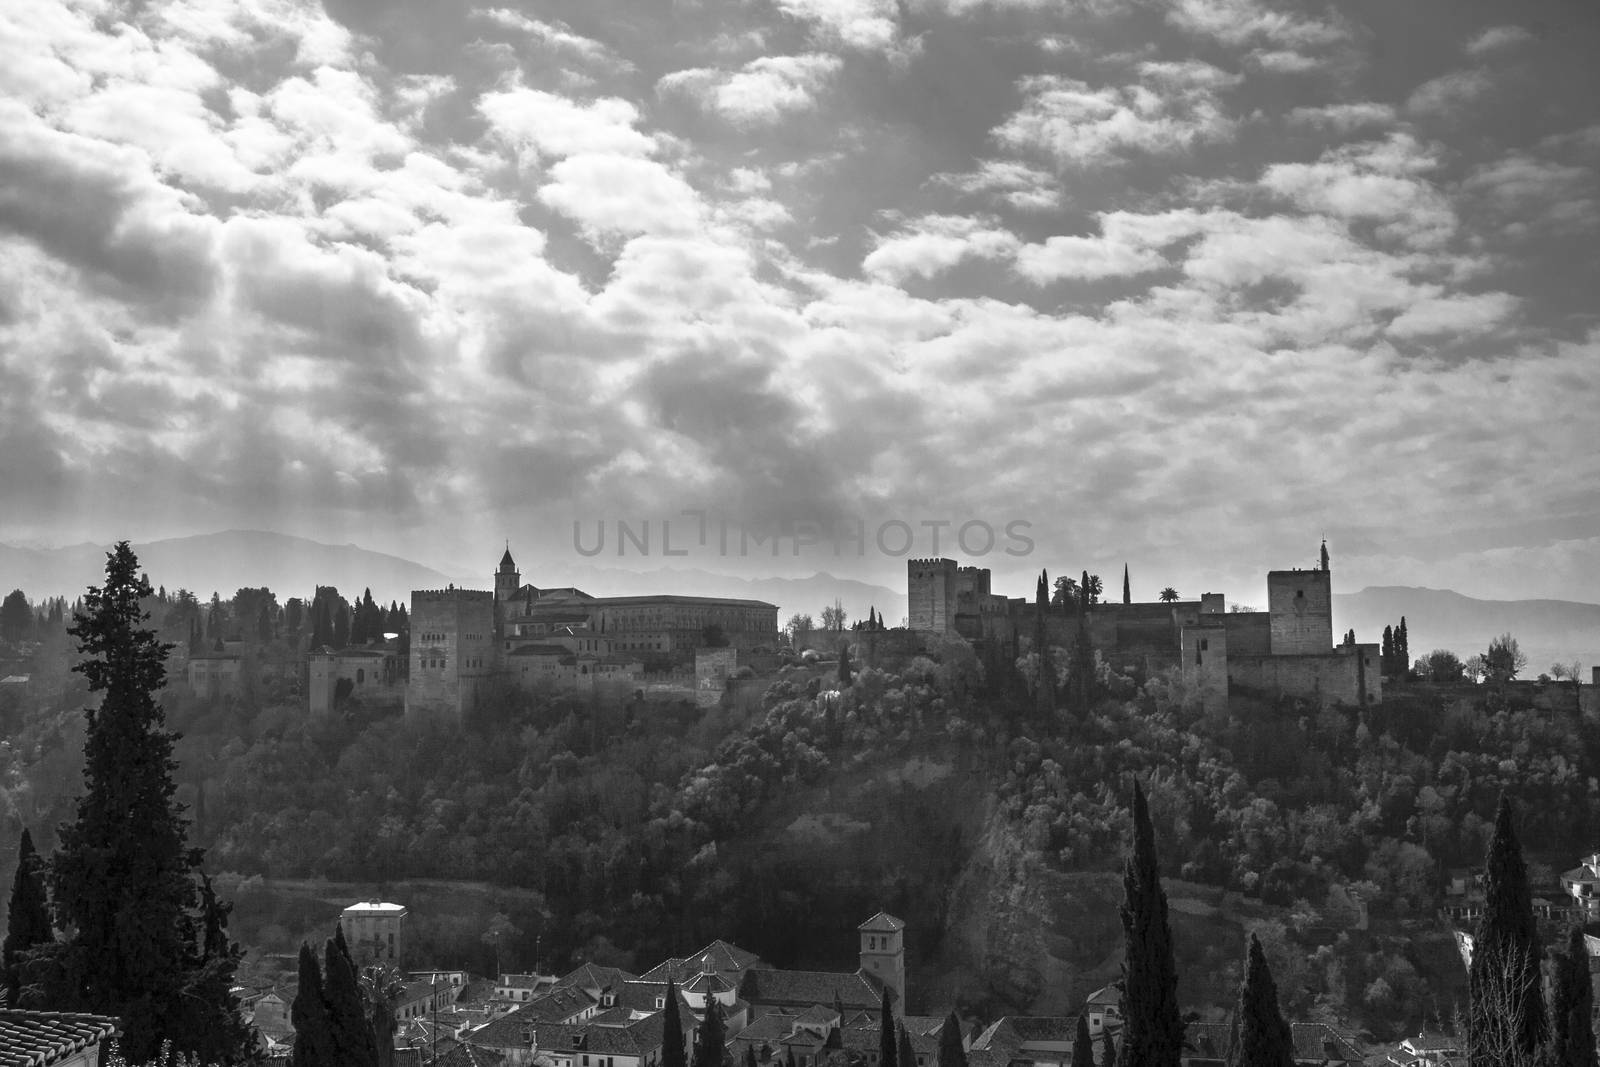 Granada - The Alhambra palace and fortress complex in Black and white by tanaonte